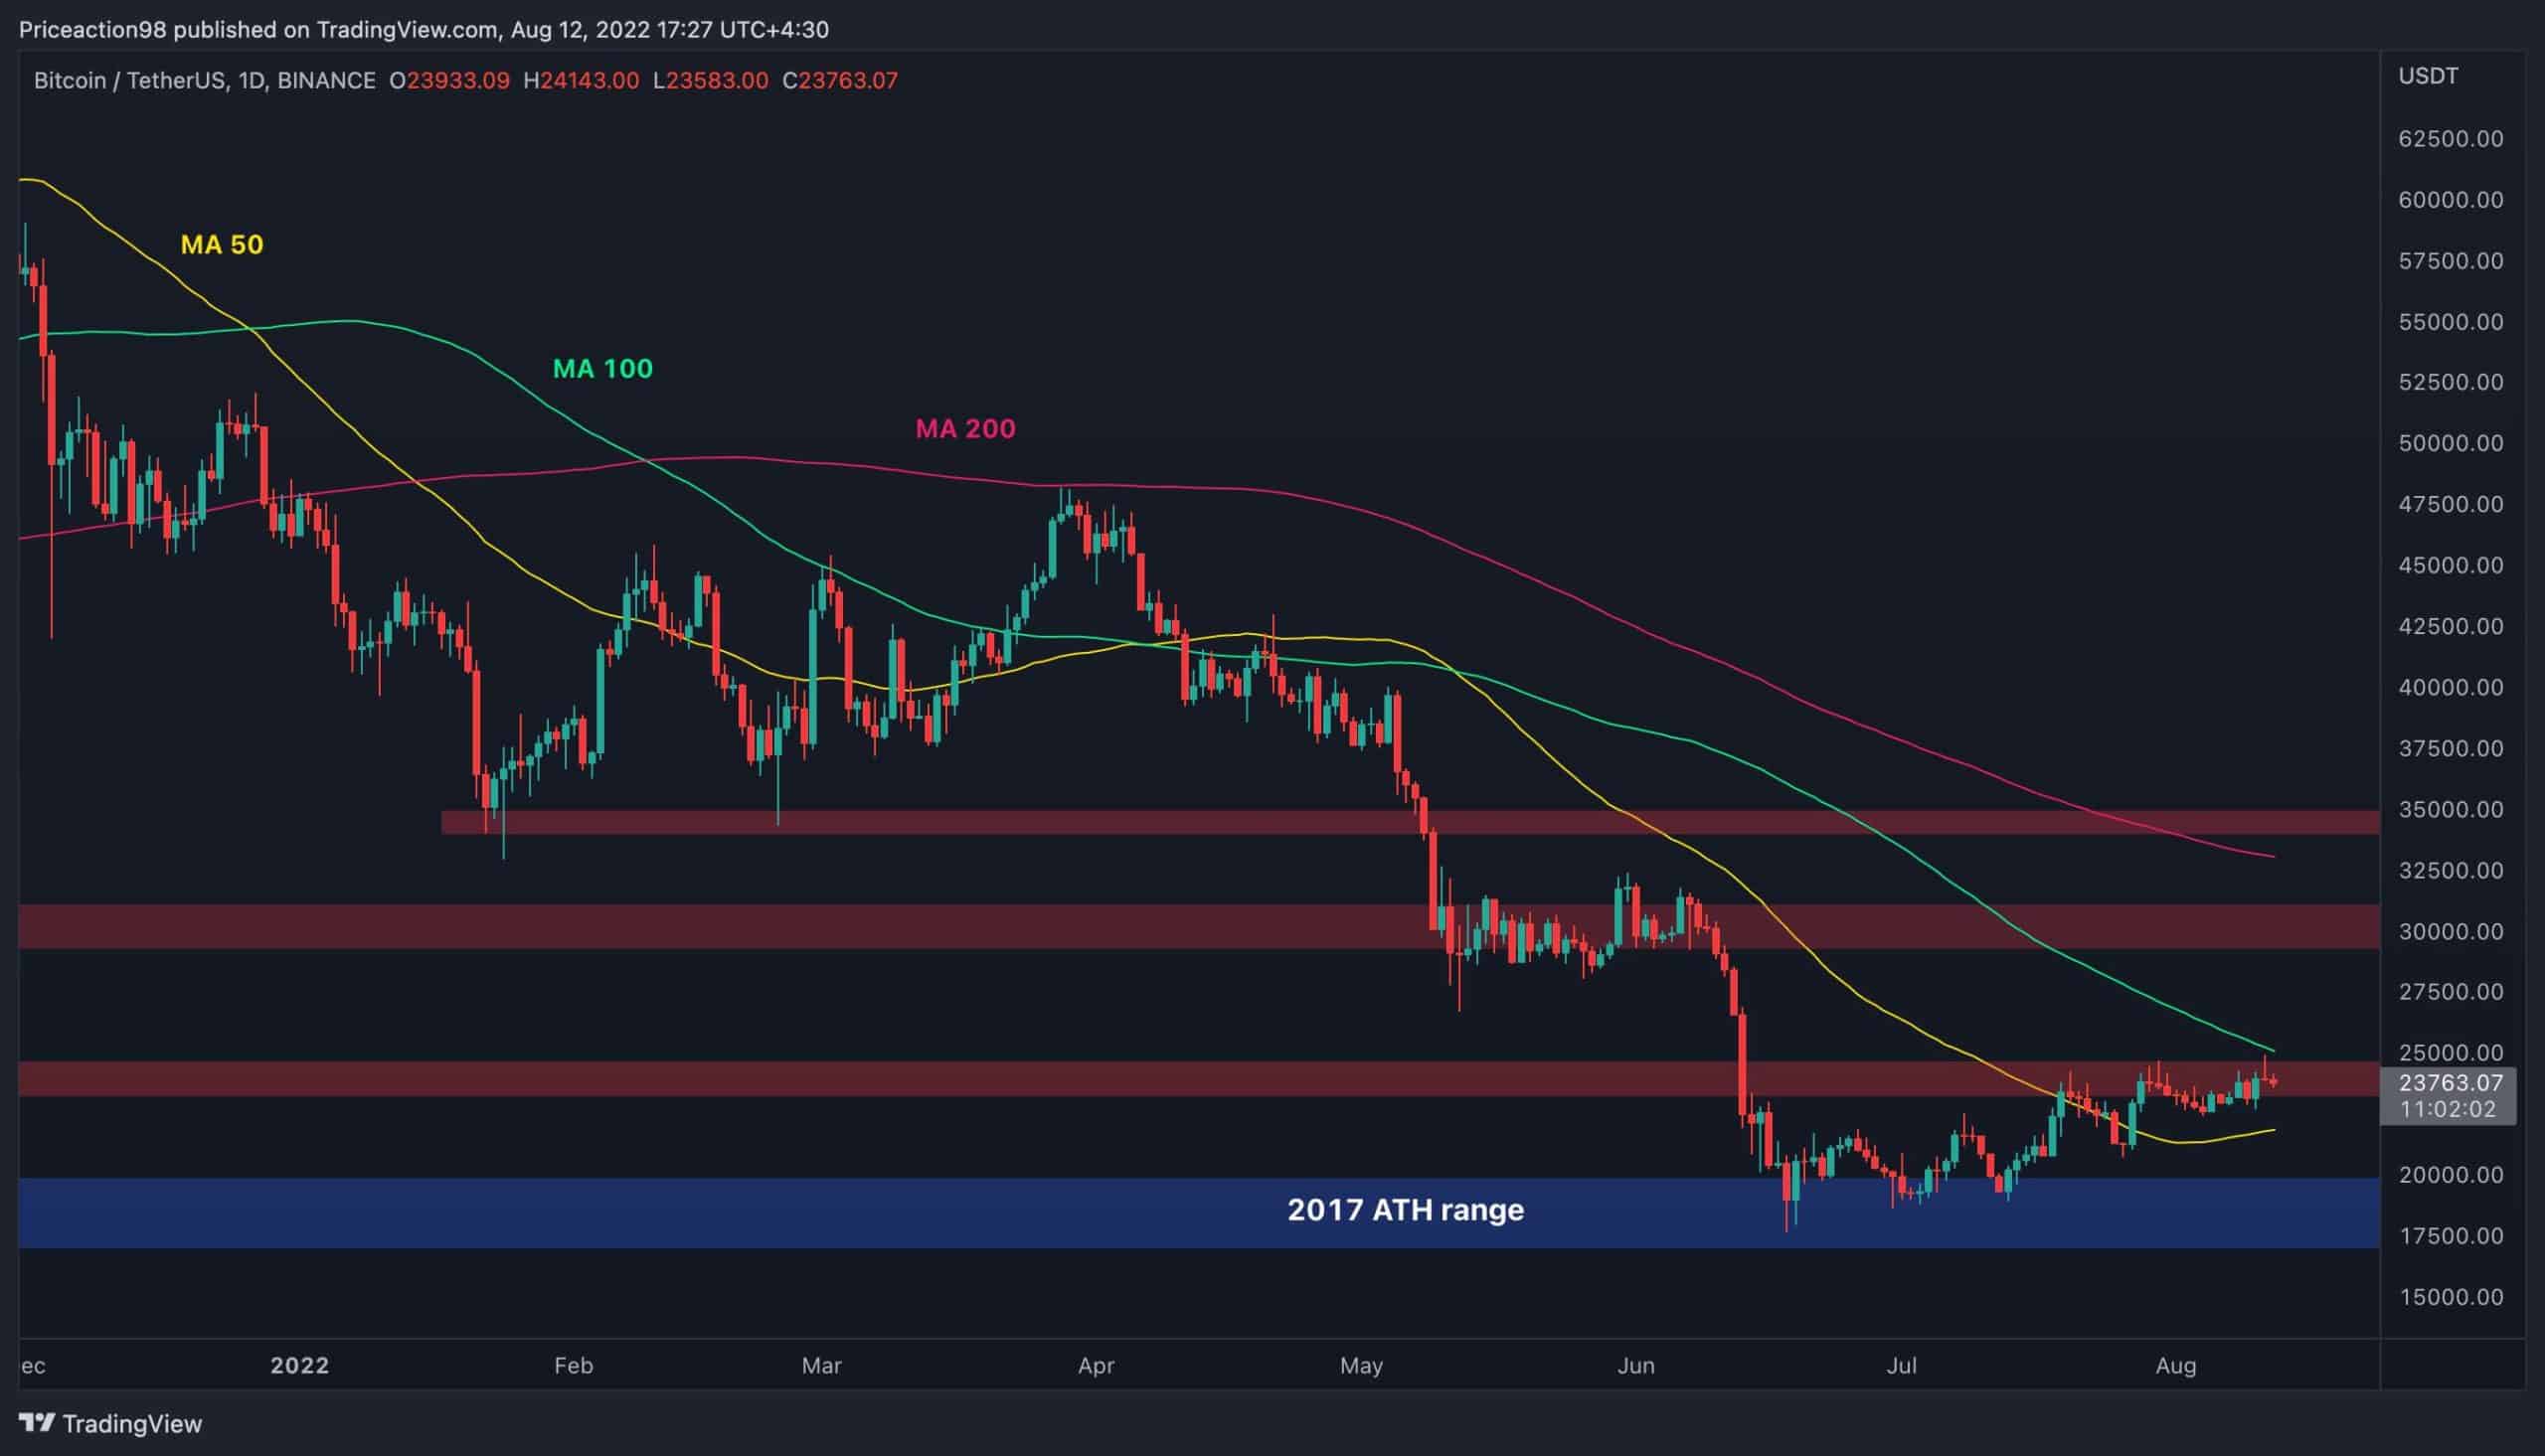 Can Bitcoin Finally Break K or is Another Crash Coming?  (BTC Price Analysis)